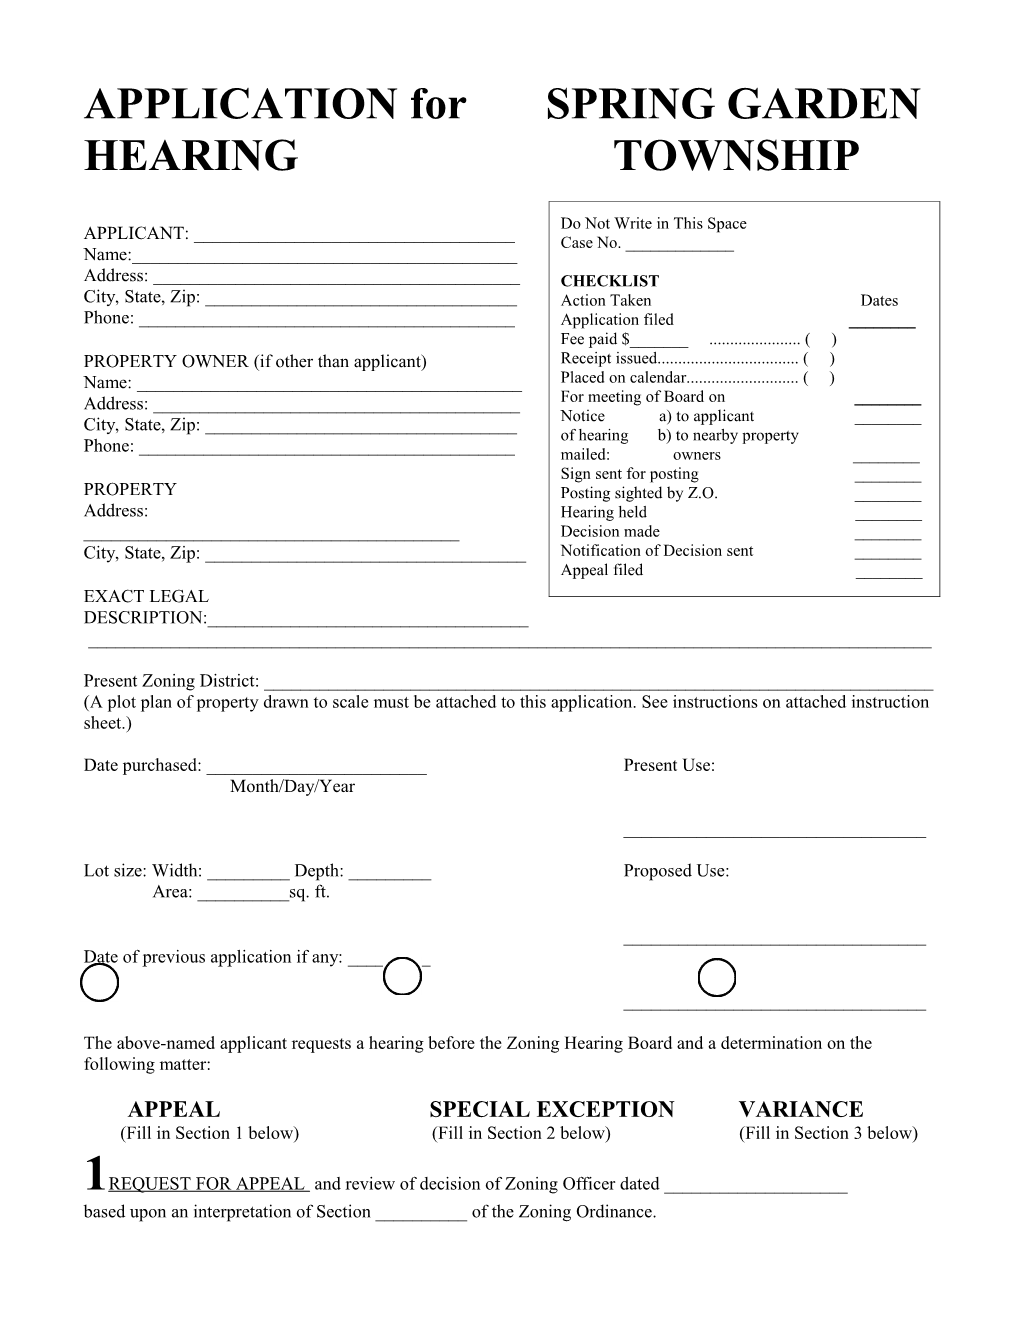 APPLICATION for HEARING